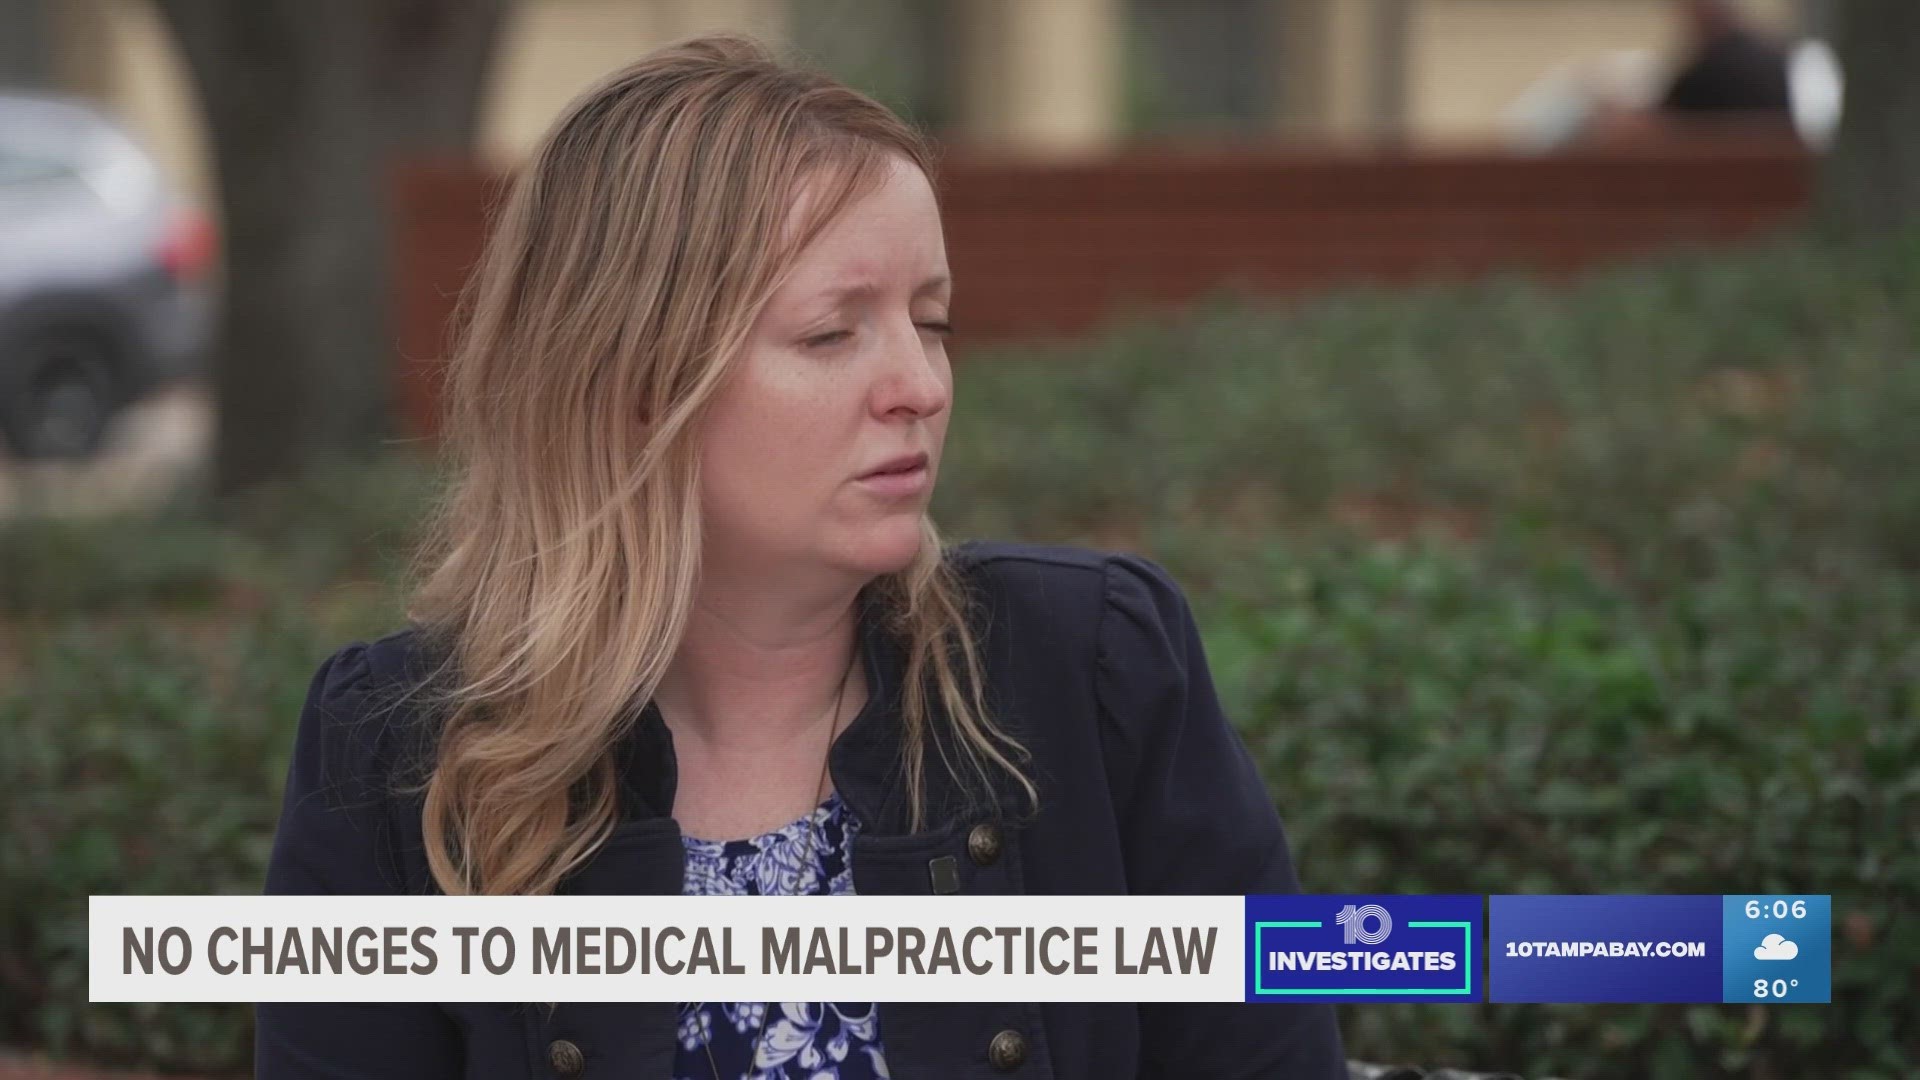 Five bills were filed to repeal a Florida law that limits who can sue over medical malpractice deaths. All of them failed.